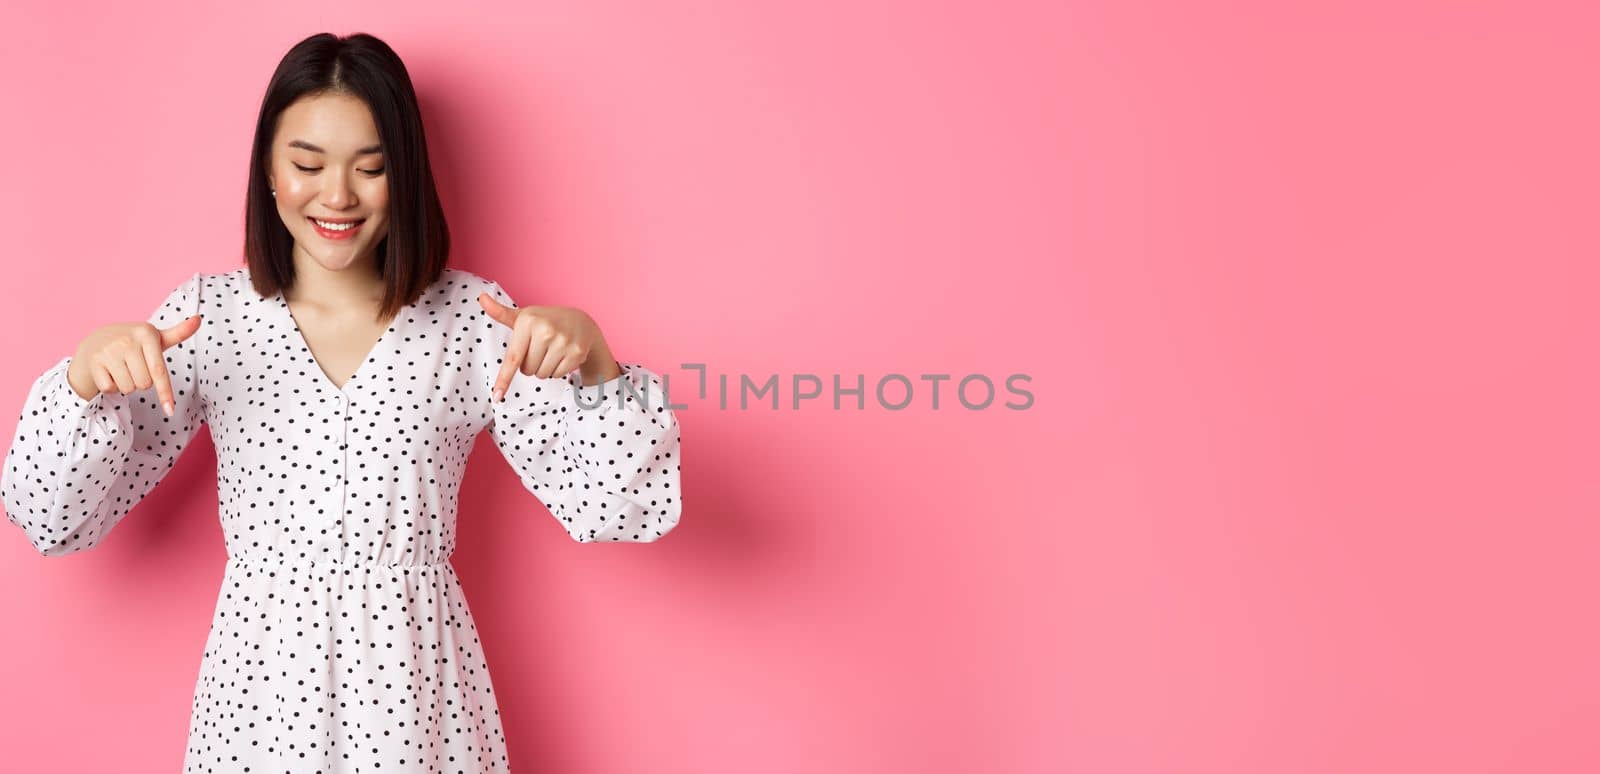 Cute romantic asian woman smiling, pointing fingers and looking down with pleased face, showing product discount, standing over pink background.